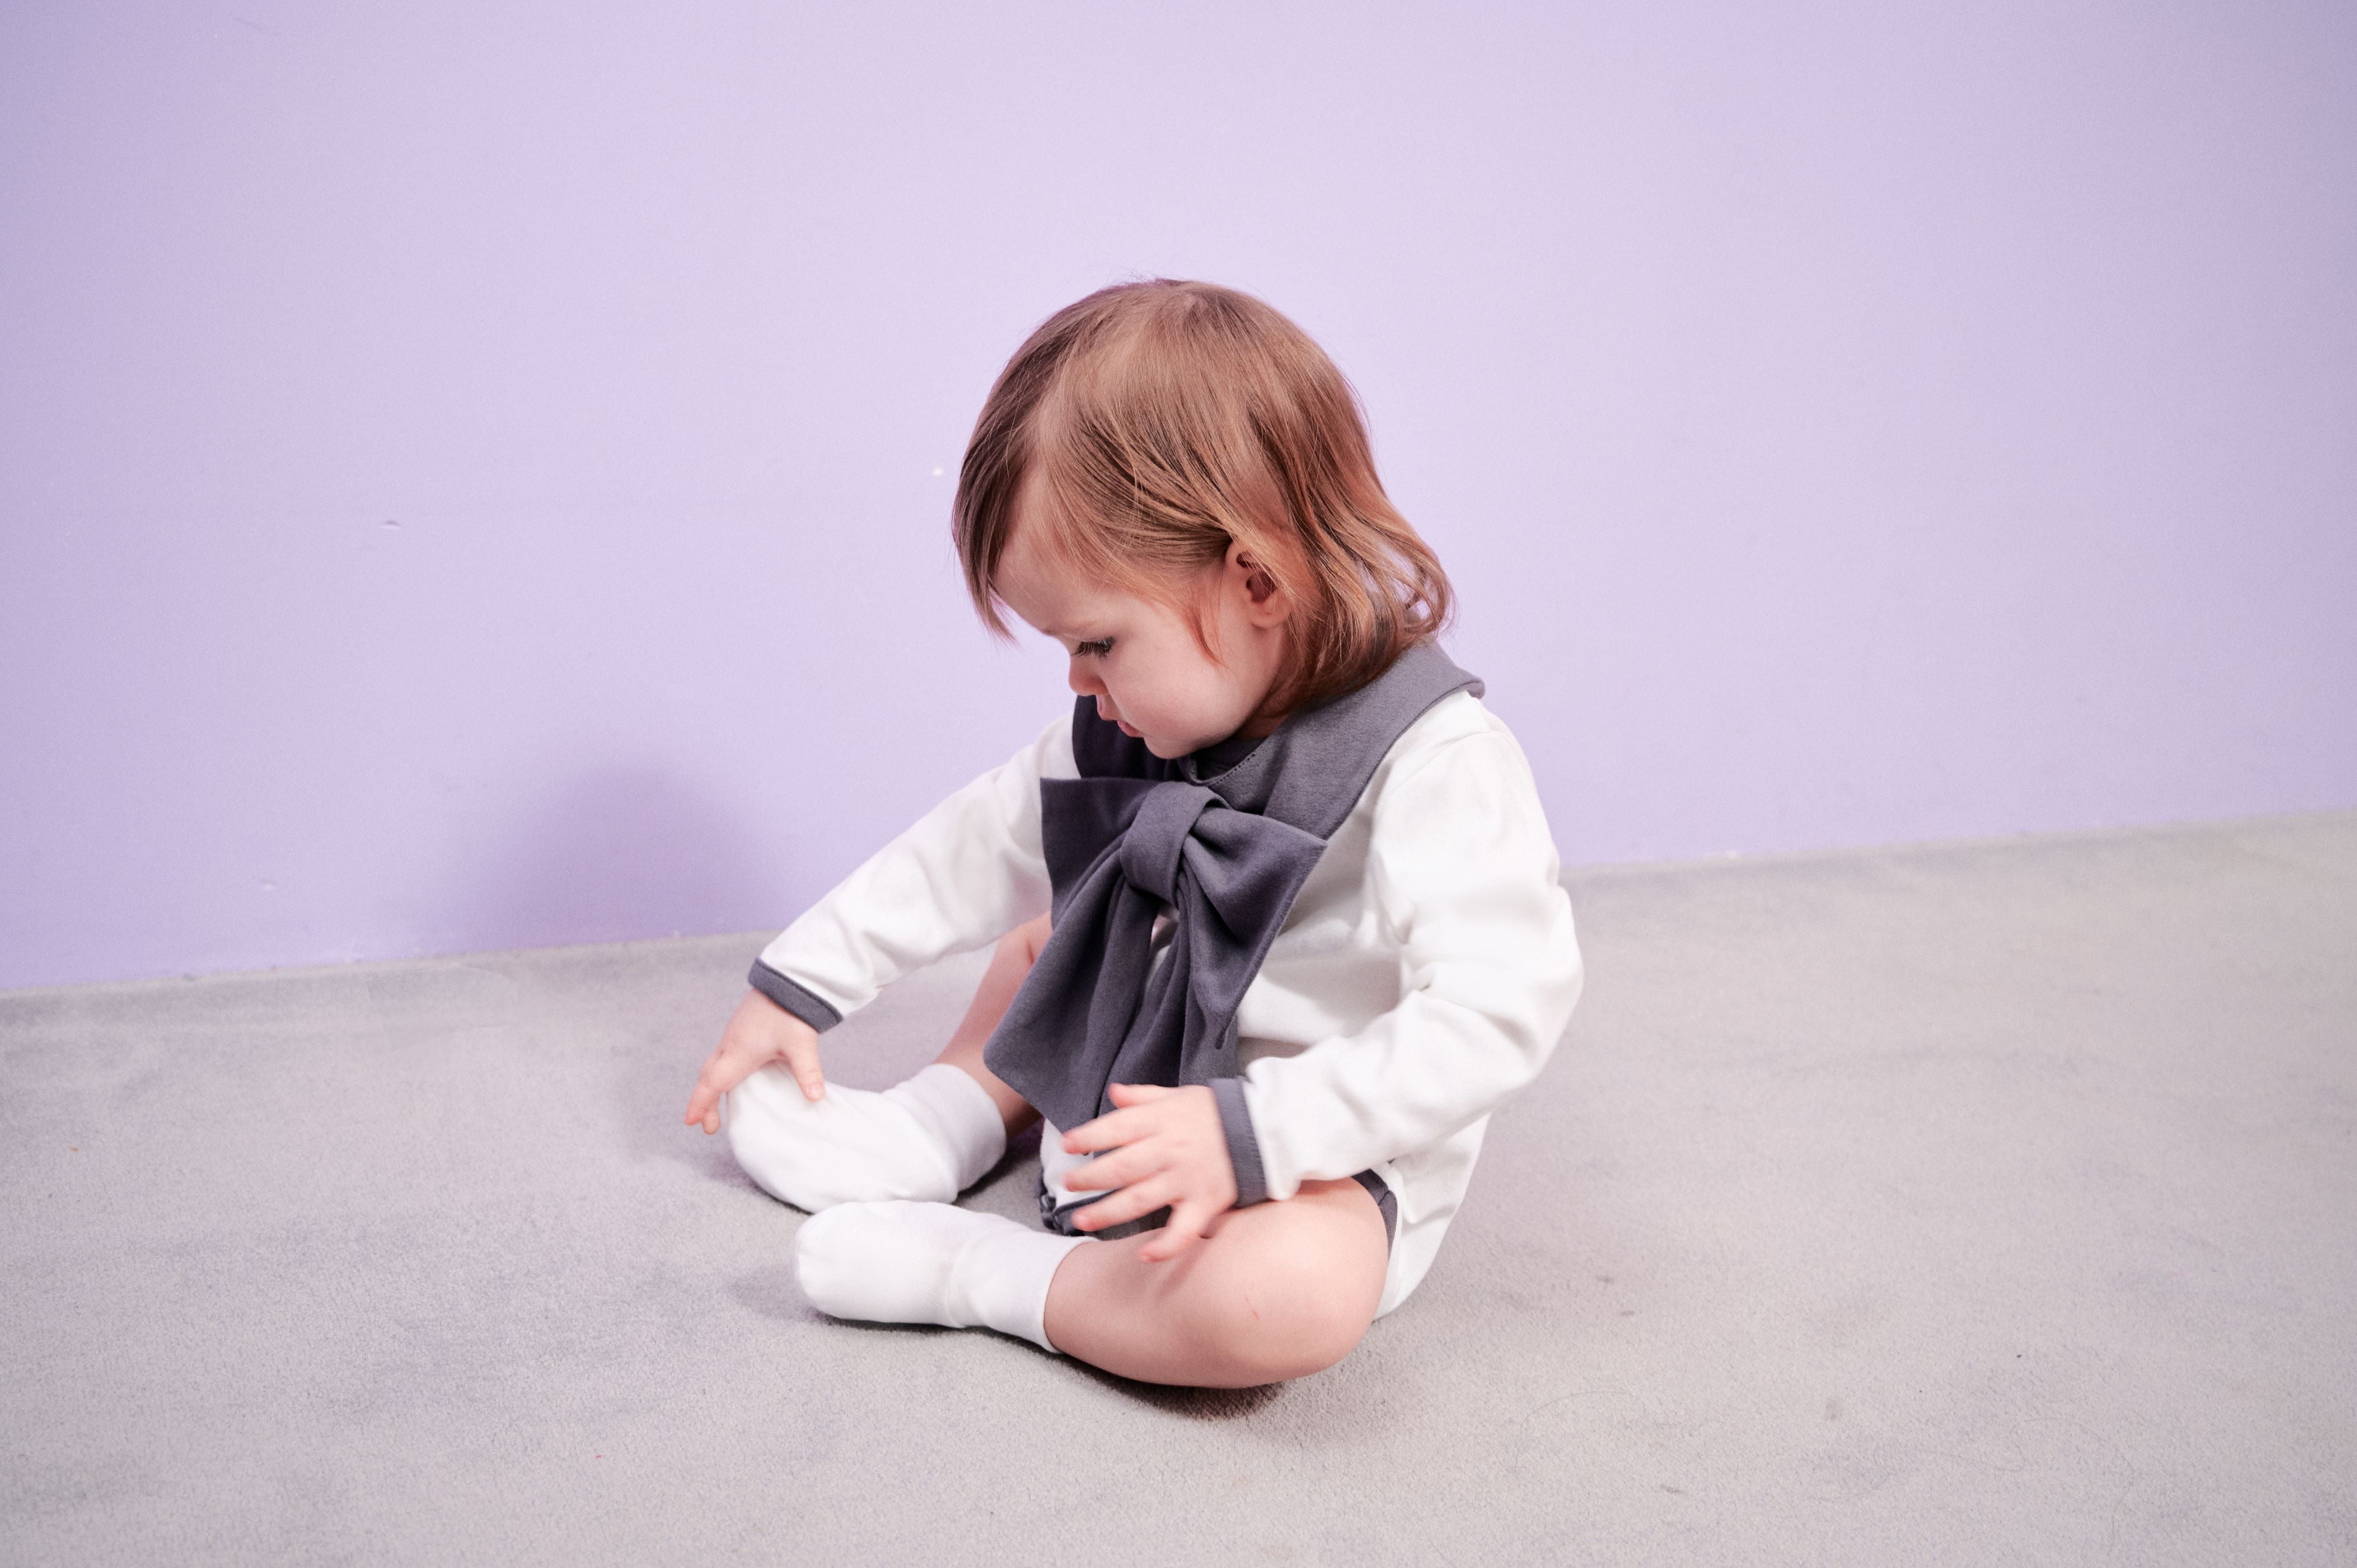 Dress Up Bodysuit (Off White): Minimalistic design with contrasting lines and charming pocket details. Paired with a ribbon scarf bib for a formal look.